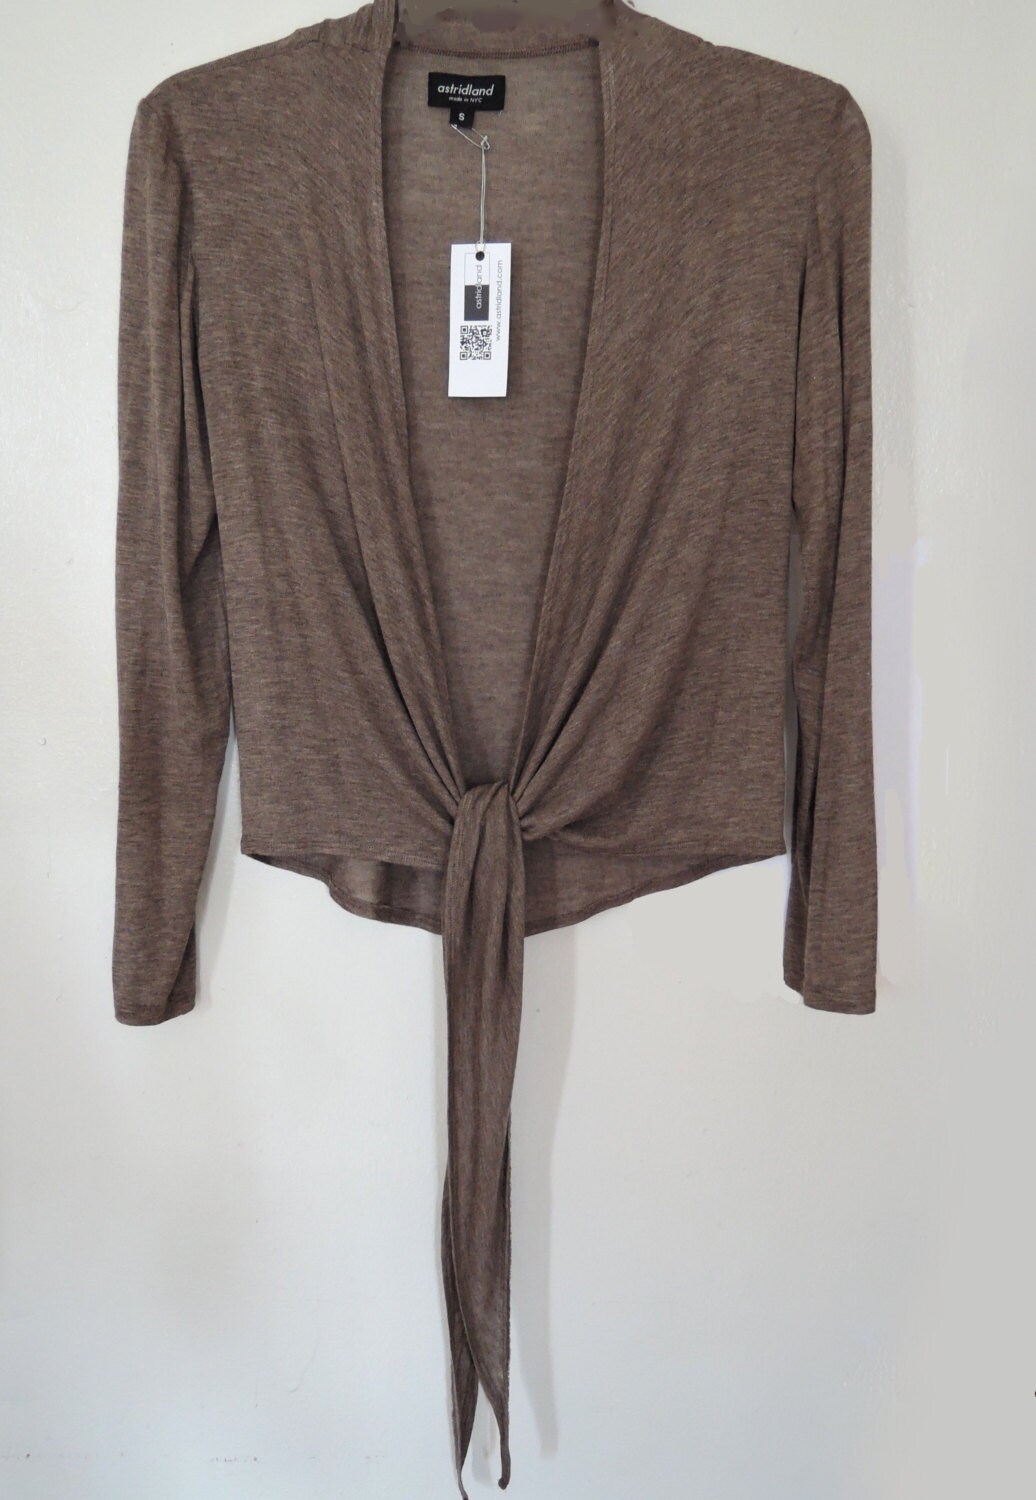 Women's taupe rayon knit wrap top size small and medium